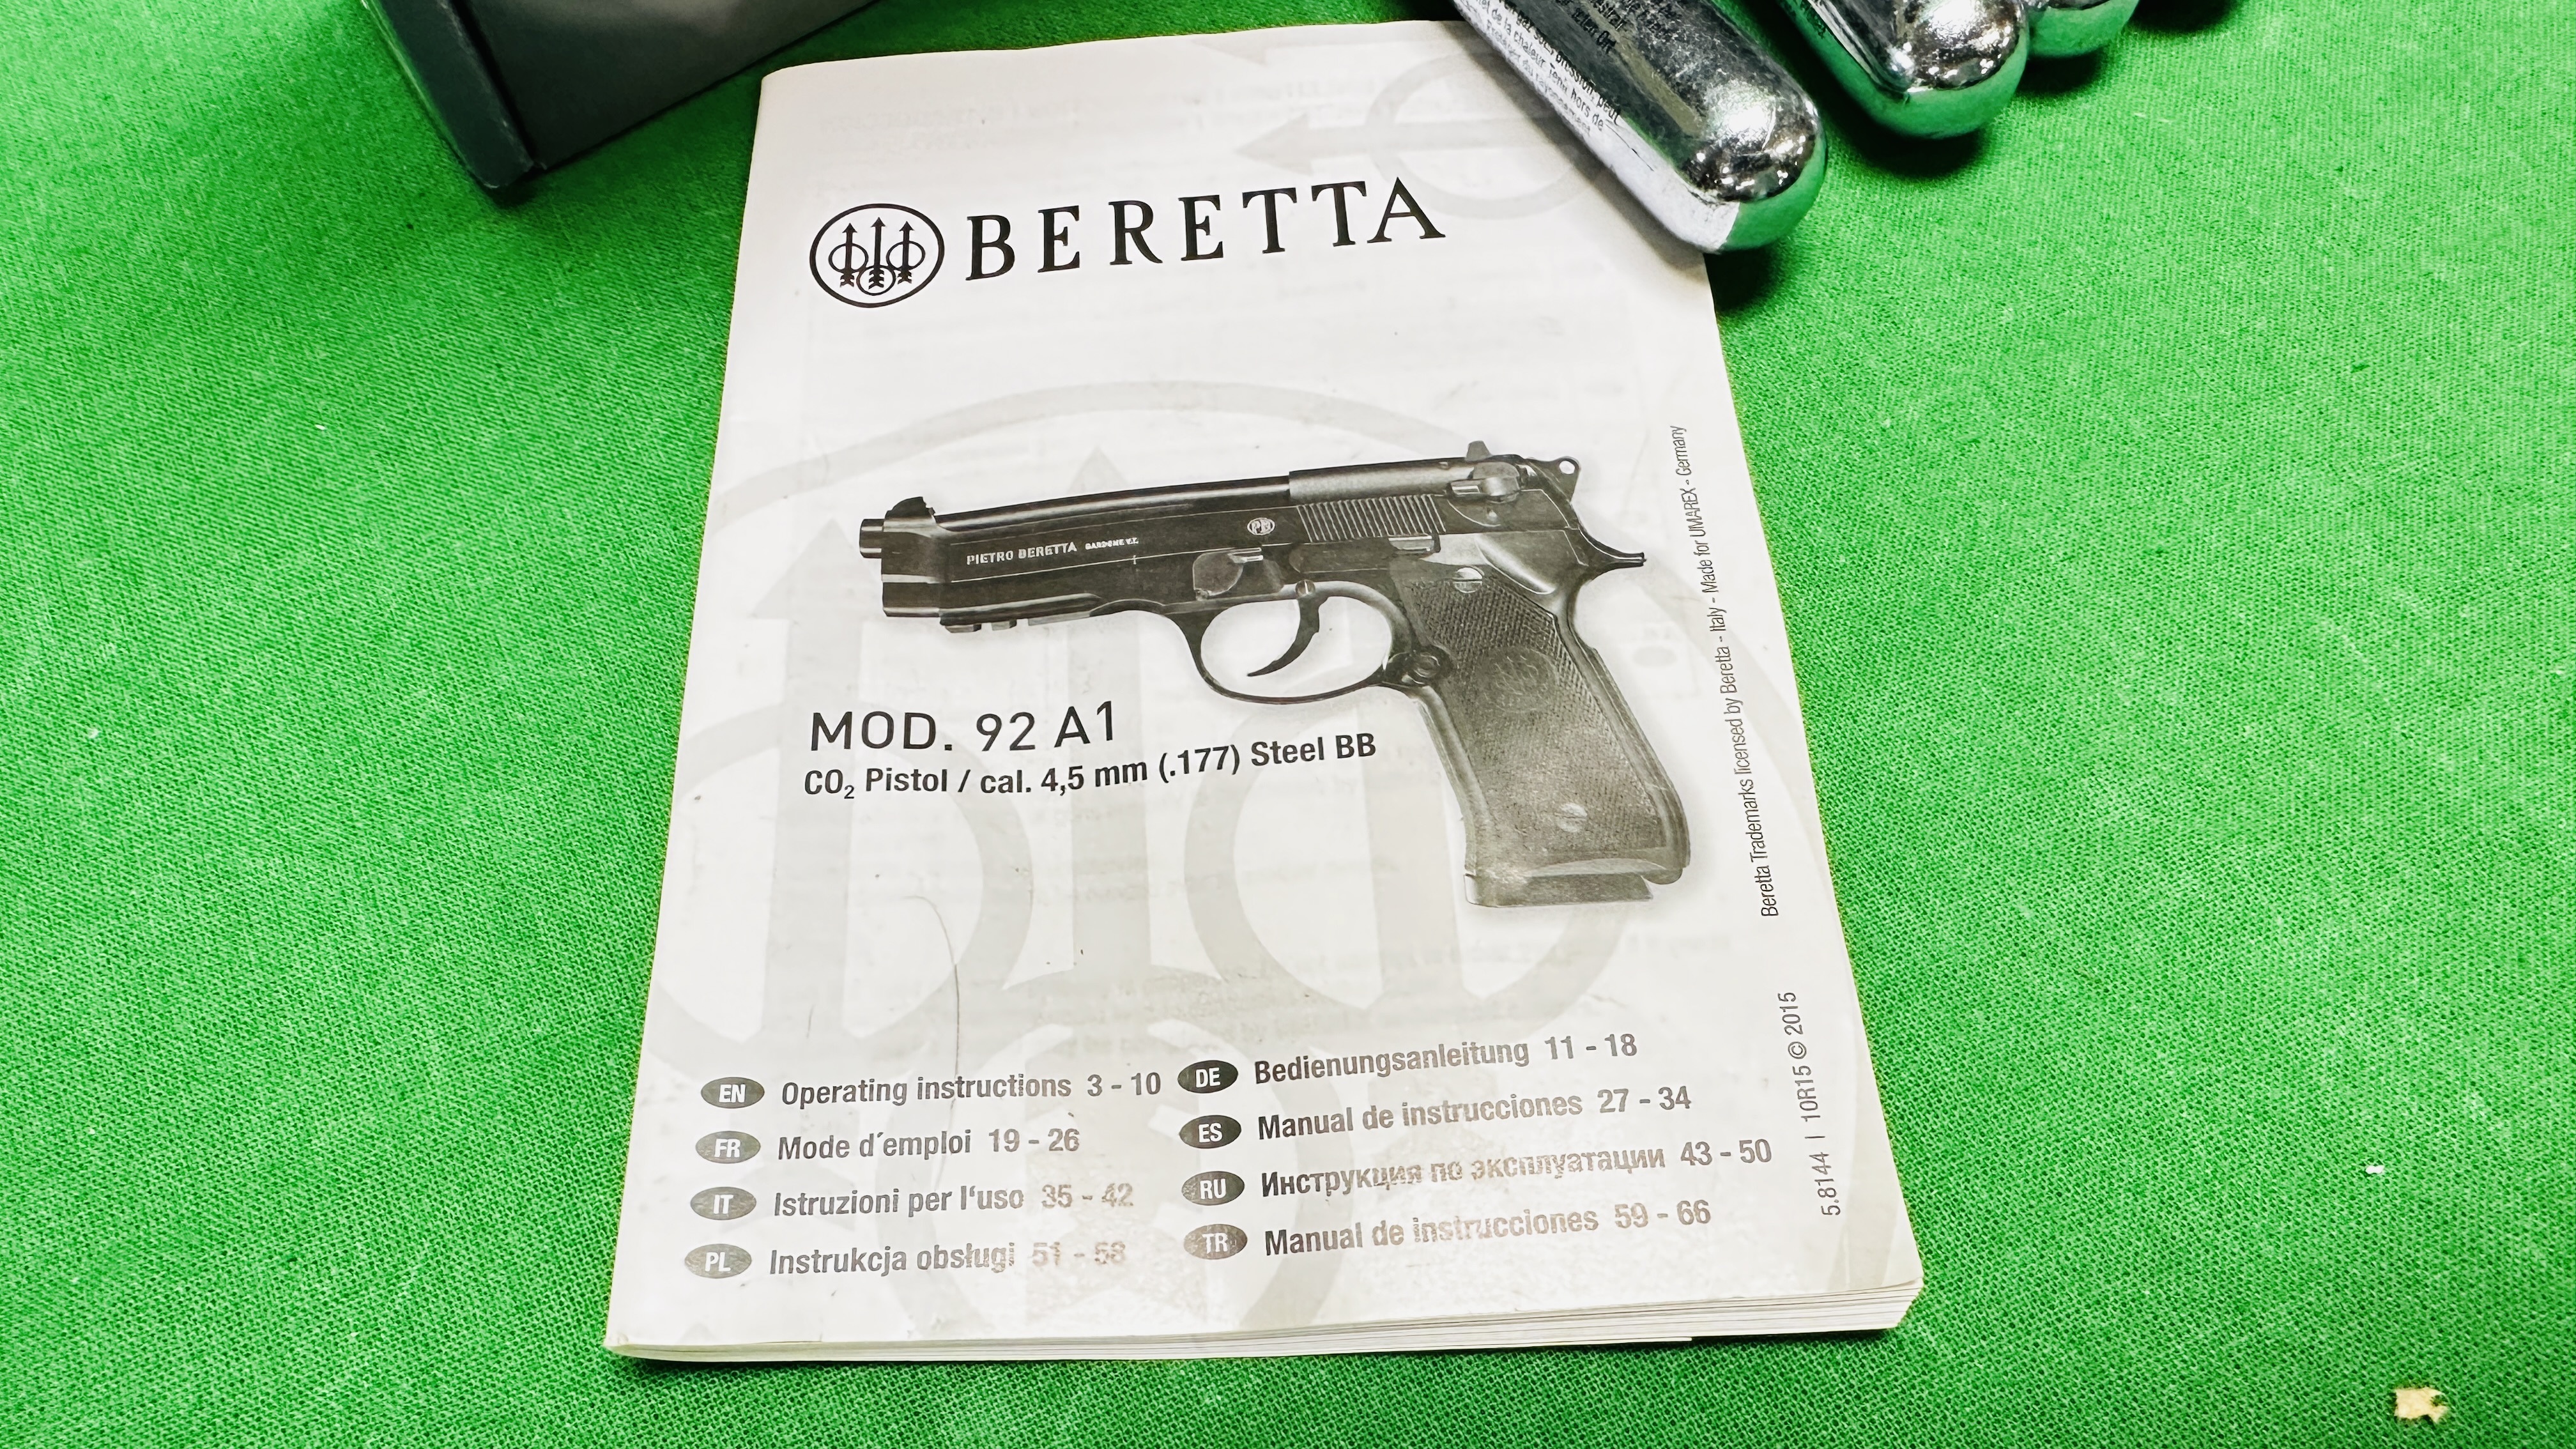 PIETRO BERETTA MOD 92 A1 18 ROUND CO2 BLOW BACK STEEL BB AIR PISTOL COMPLETE WITH ORIGINAL BOX, - Image 12 of 18